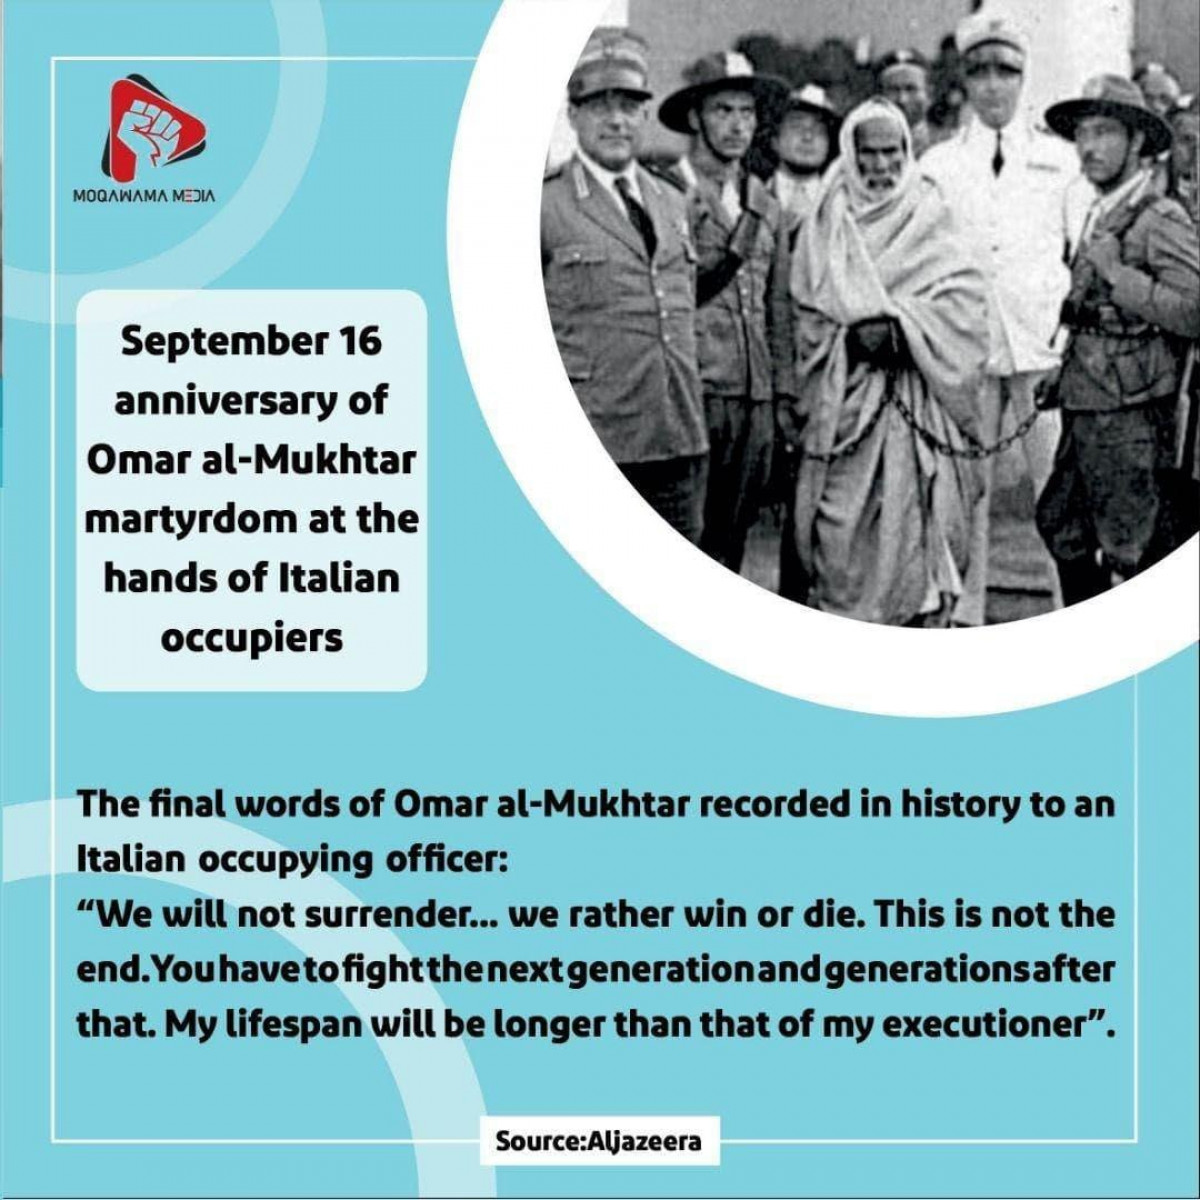 The final words of Omar al-Mukhtar recorded in history to an Italian occupying officer: